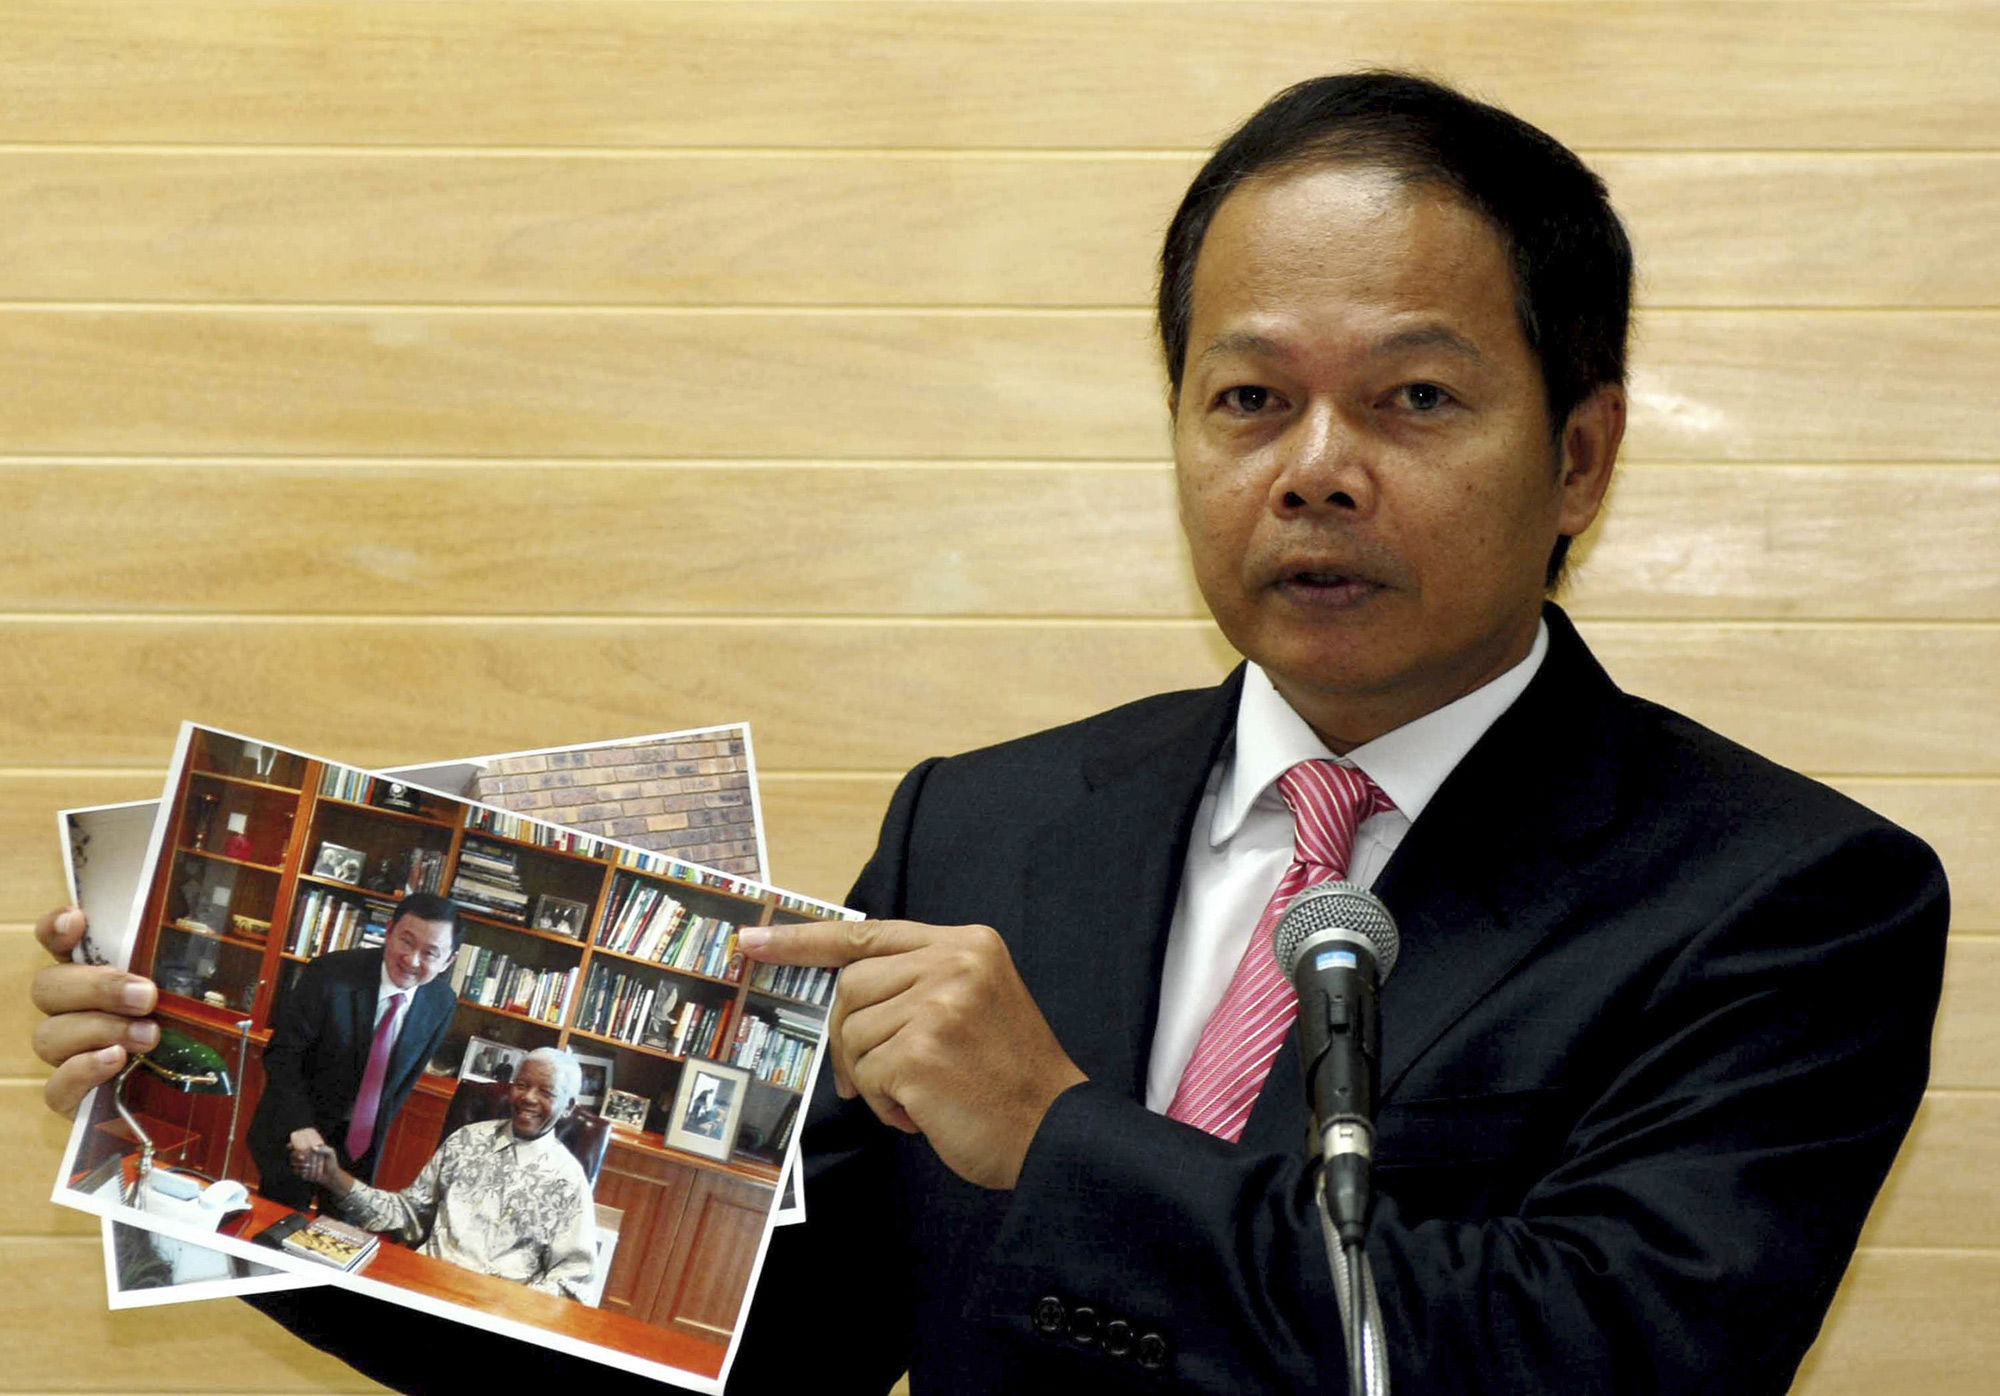 Noppadol Pattama, a legal adviser for ousted Thai prime minister and fugitive from justice Thaksin Shinawatra, shows photos of Shinawatra meeting former South African president Nelson Mandela in Johannesburg last month. (Phue Thai Party, AP)